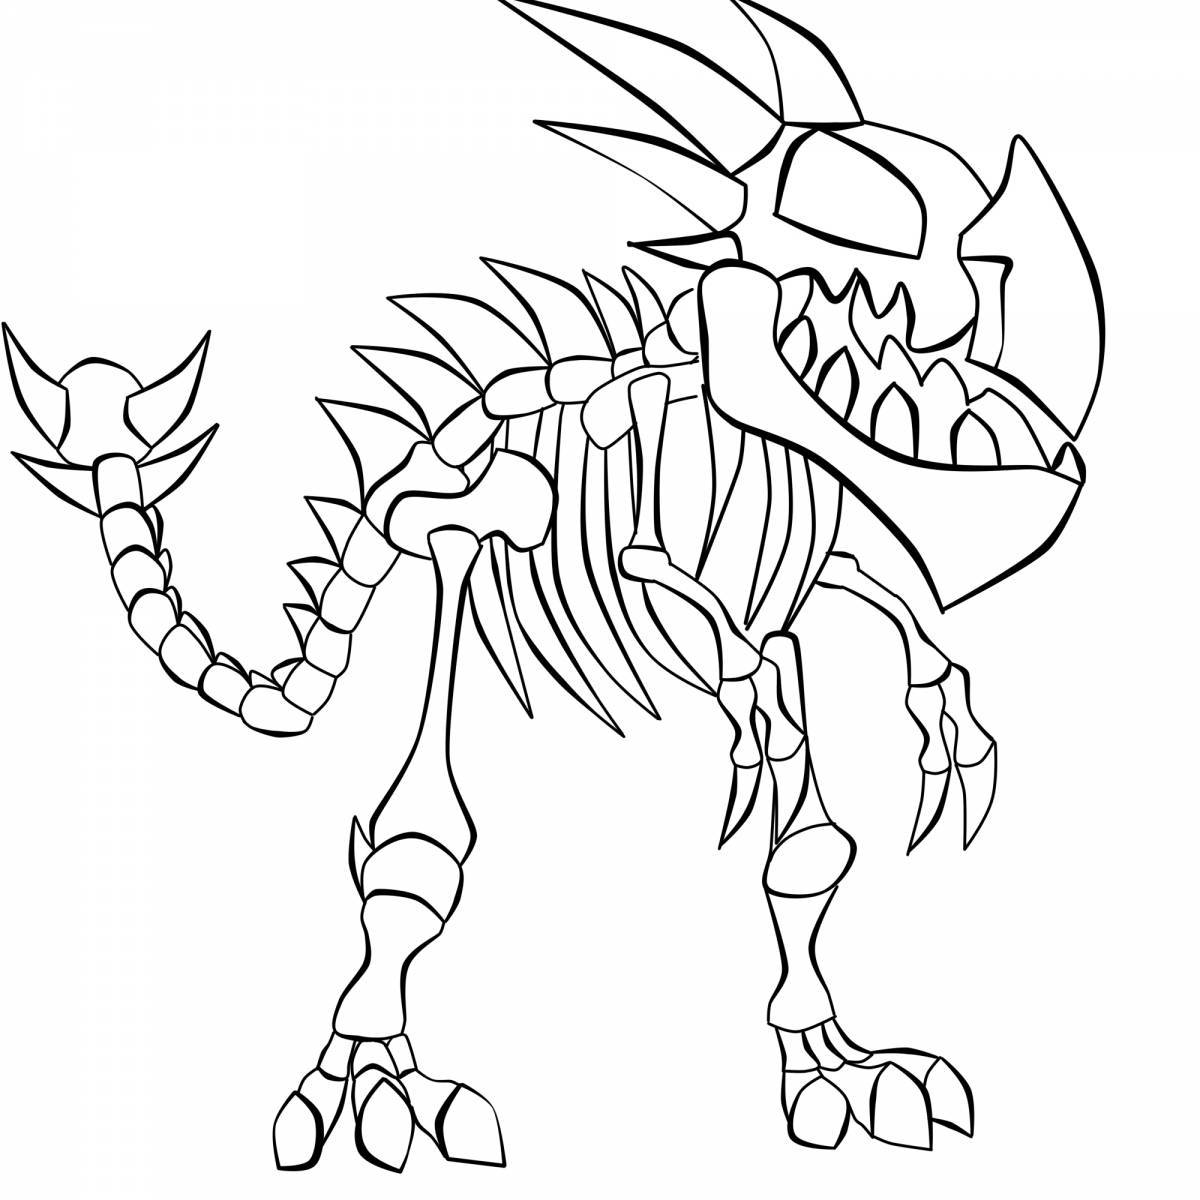 Terrifying monster coloring pages